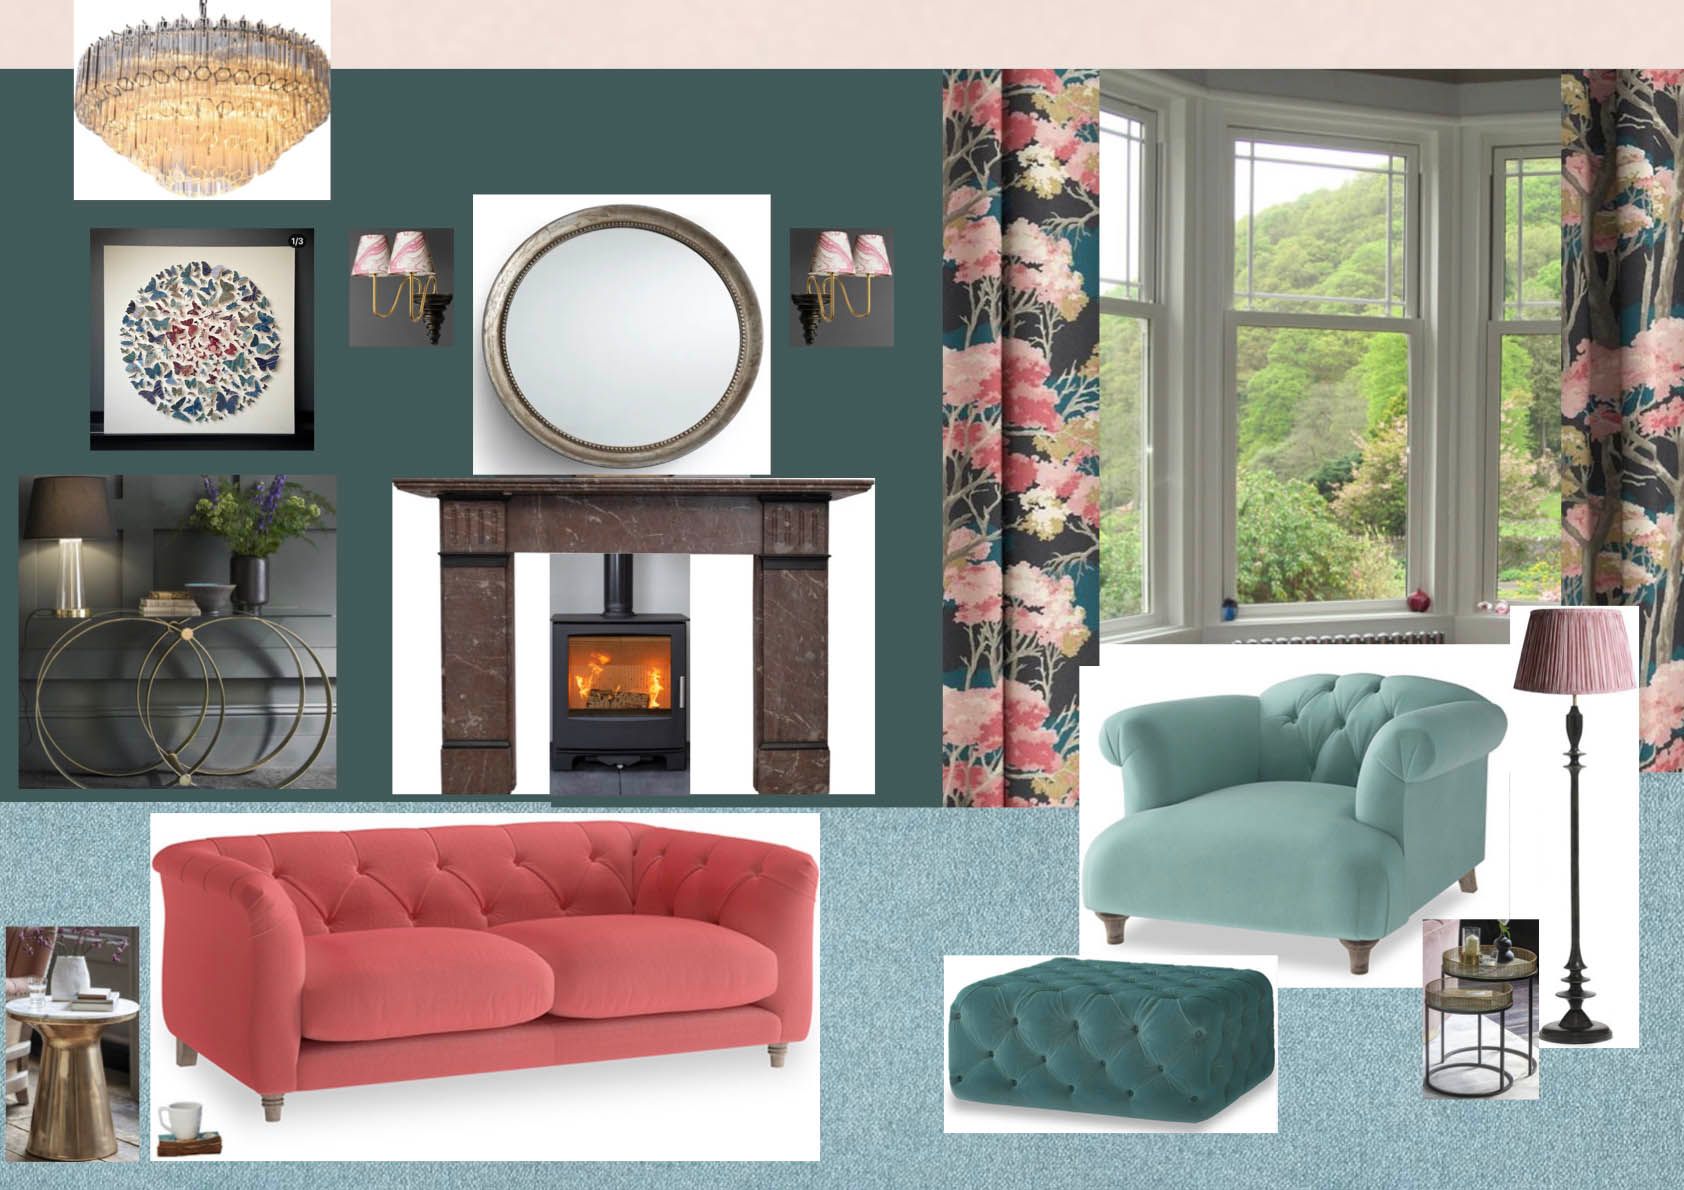 Mood board for teal and peach coloured lounge room. How we work at K Interiors.